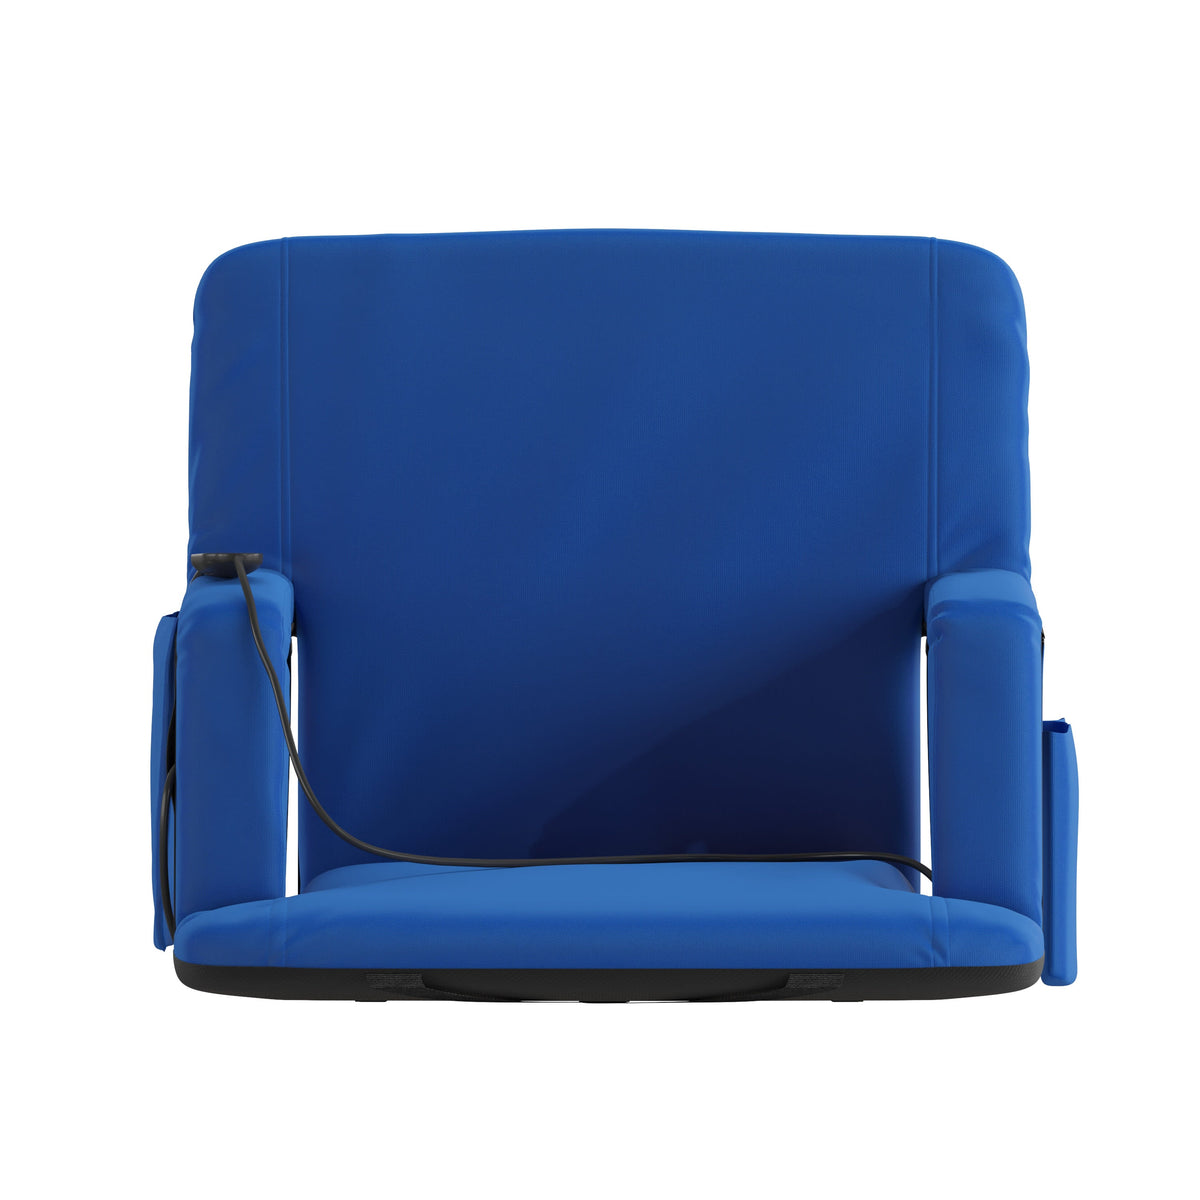 Blue |#| Foldable Reclining Stadium Chair with Backpack Straps and Heated Seat - Blue